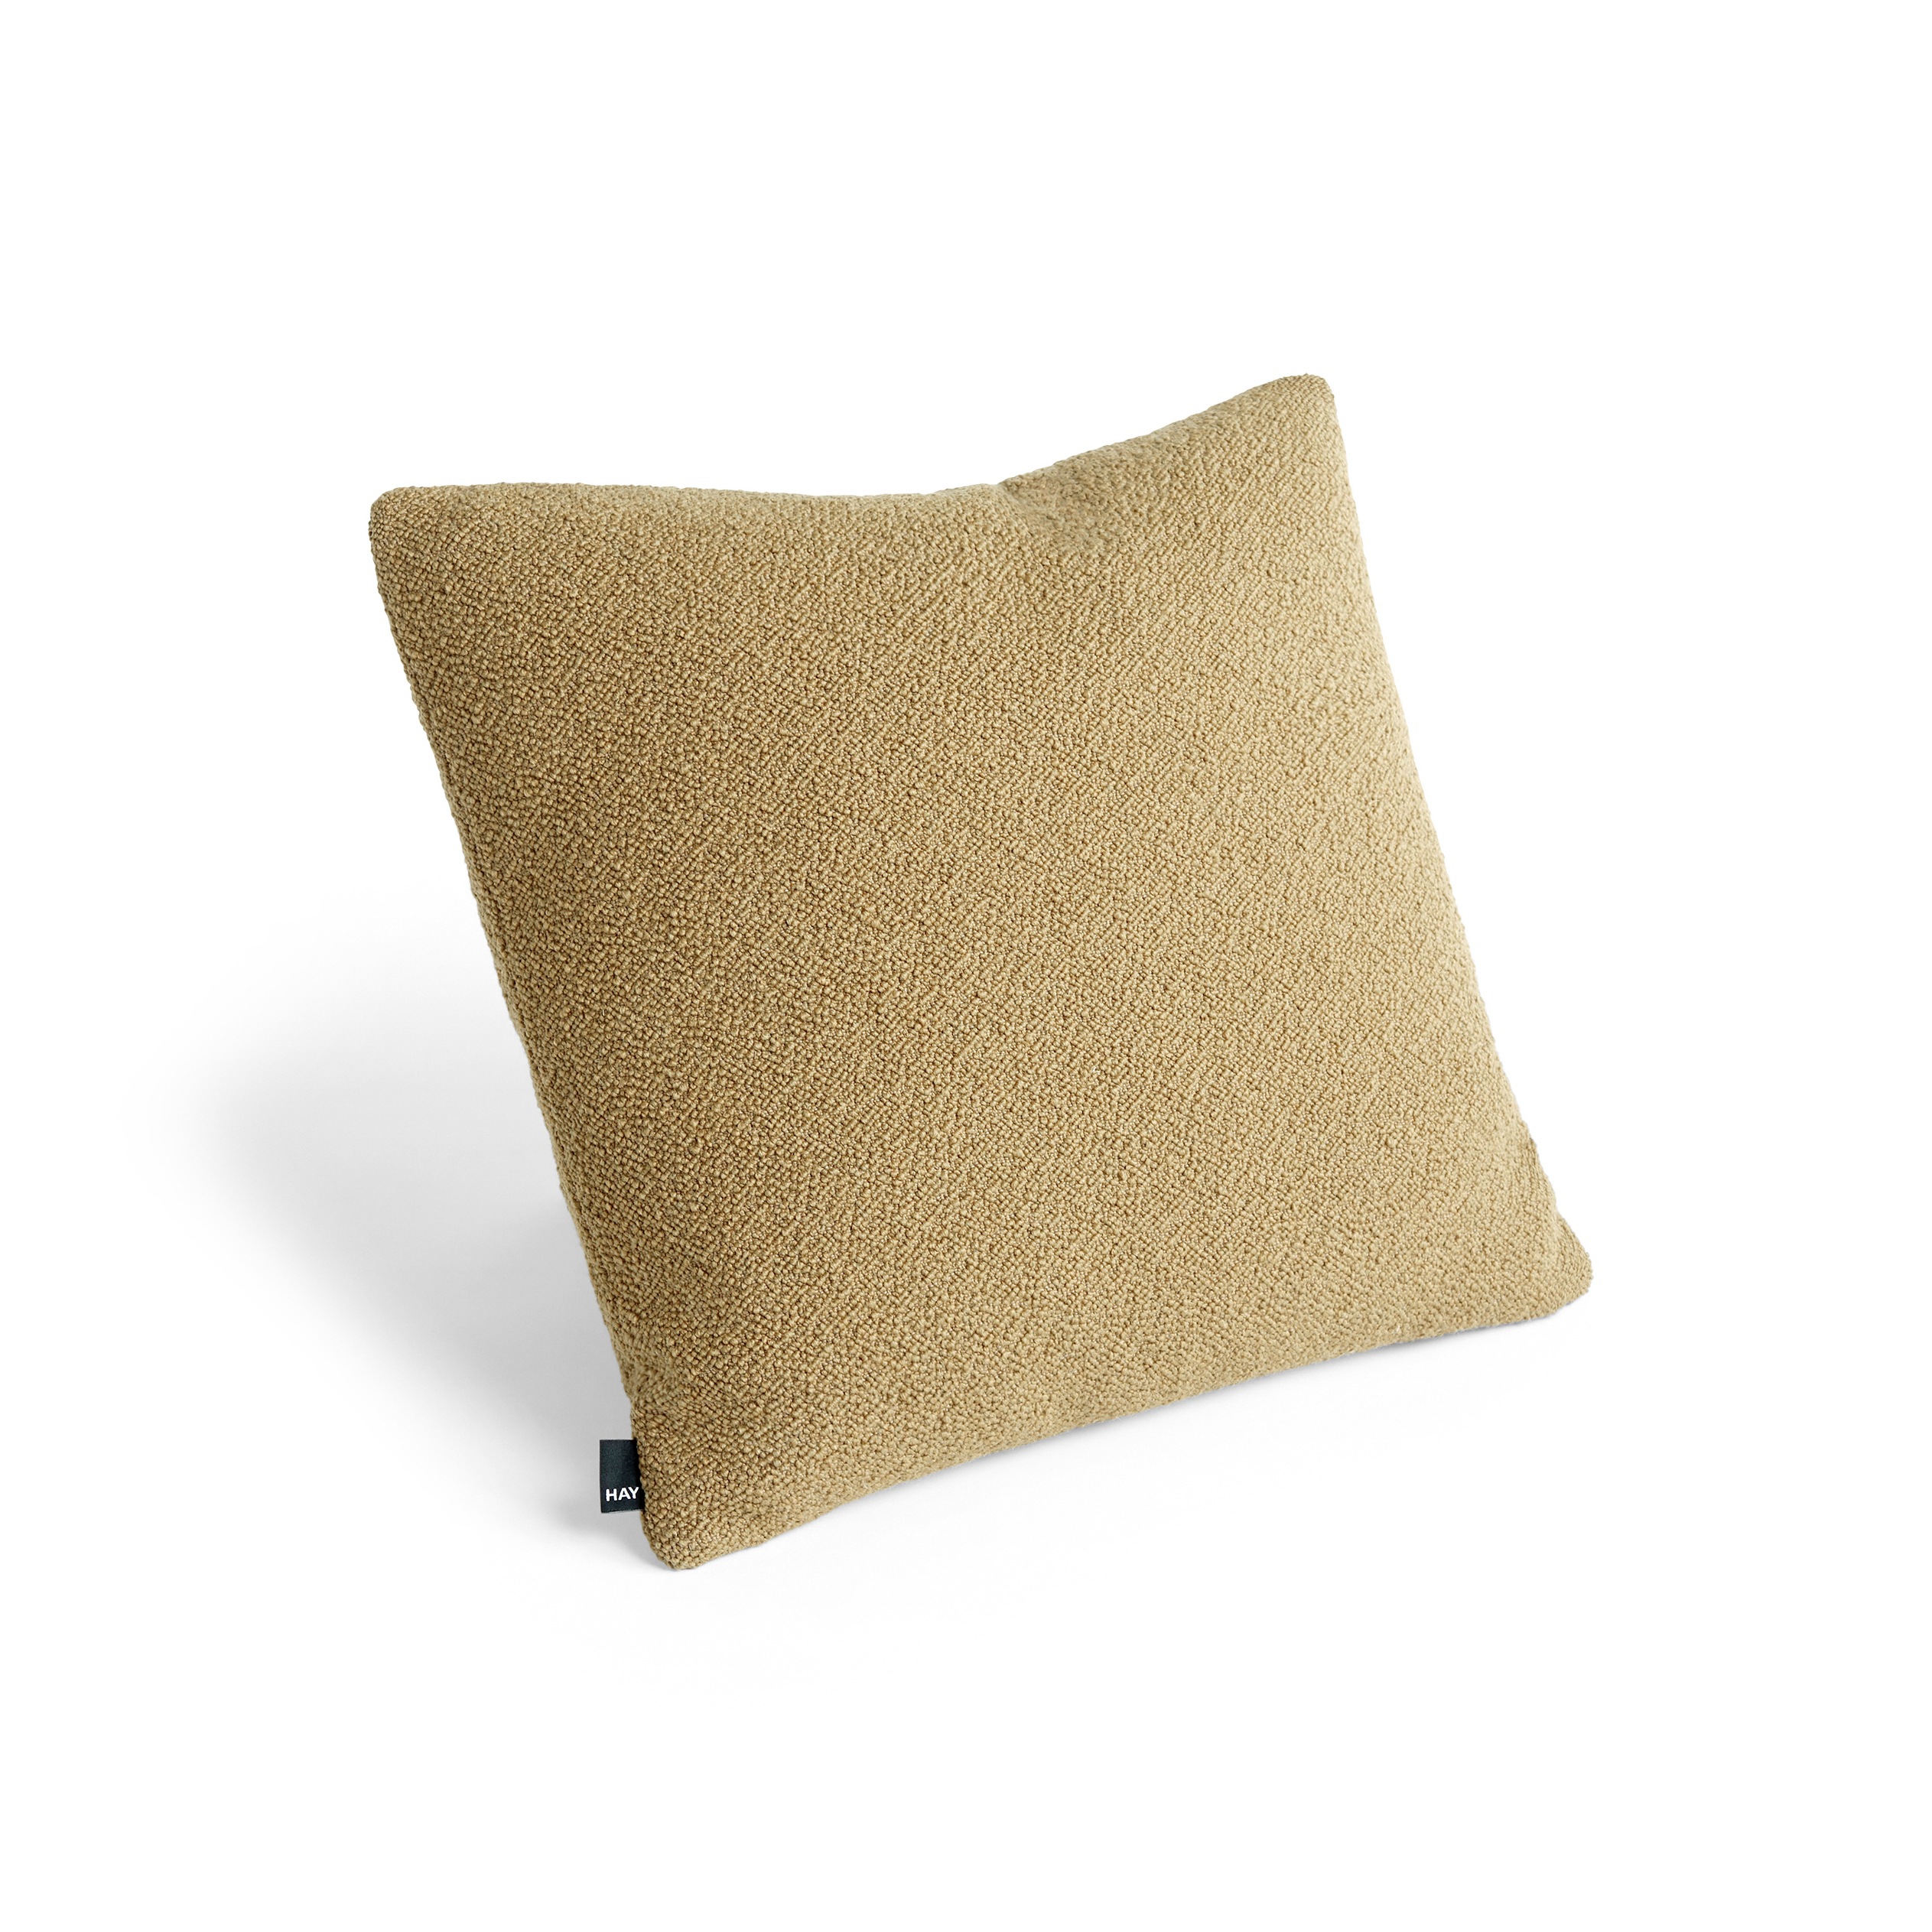 Hee Cushion by HAY · Really Well Made